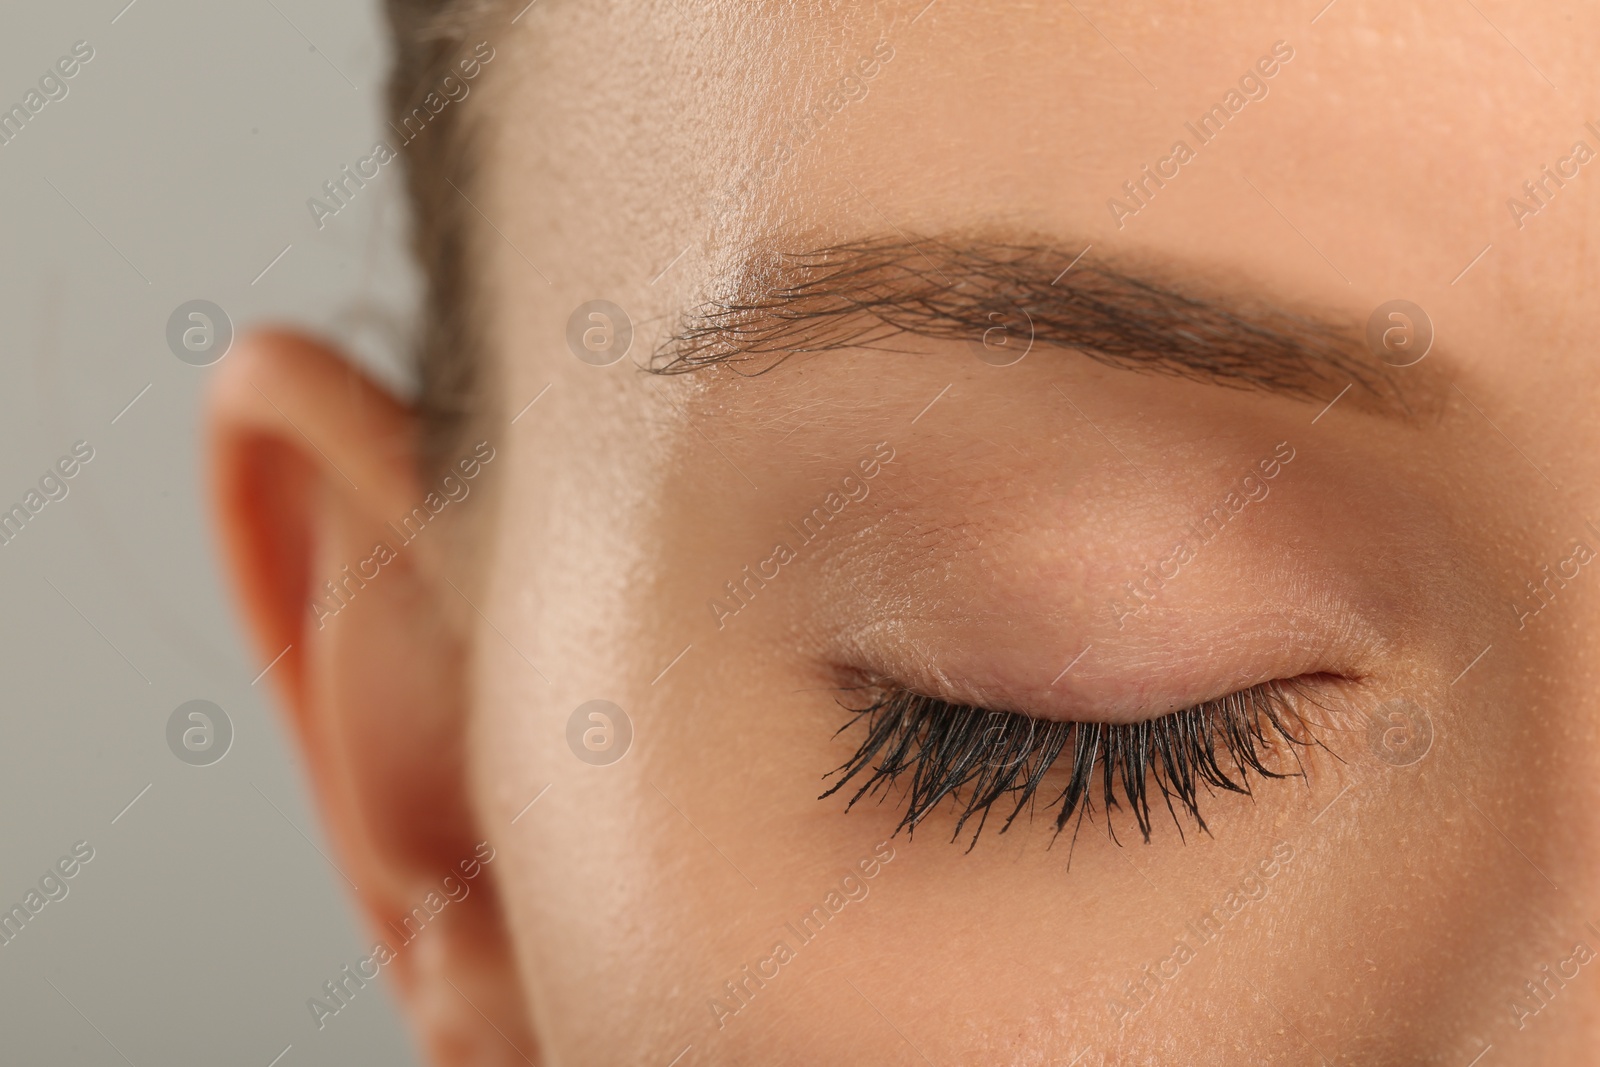 Photo of Woman with long eyelashes after mascara applying against grey background, closeup